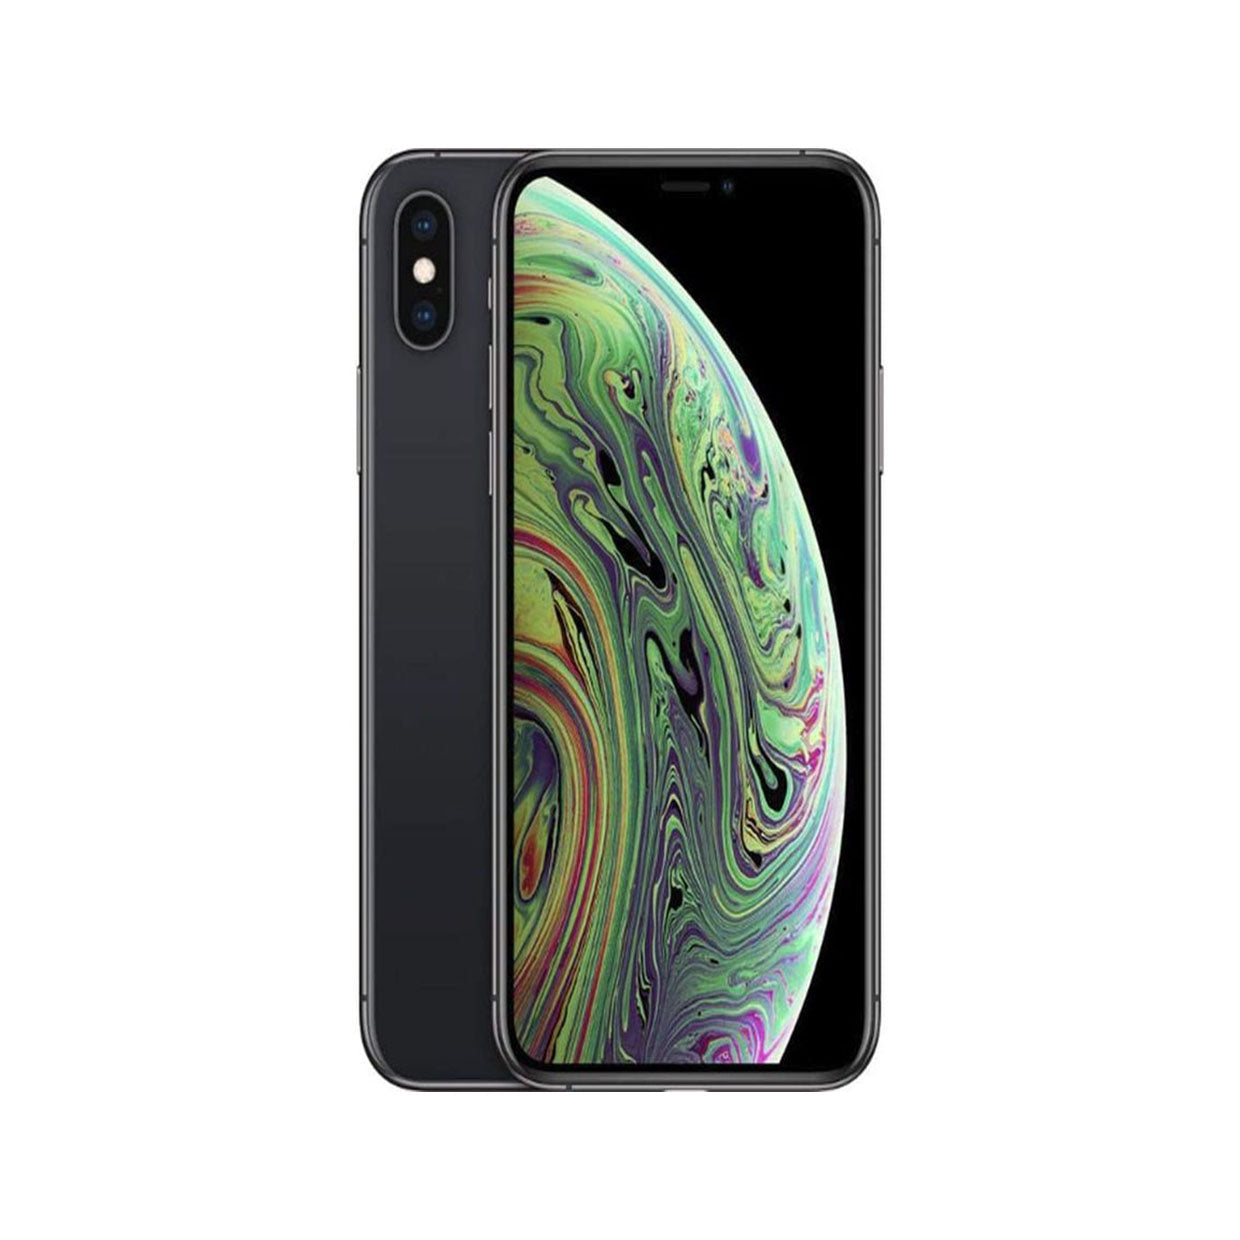 Apple iPhone XS MAX 256GB 4G LTE -Space Gray